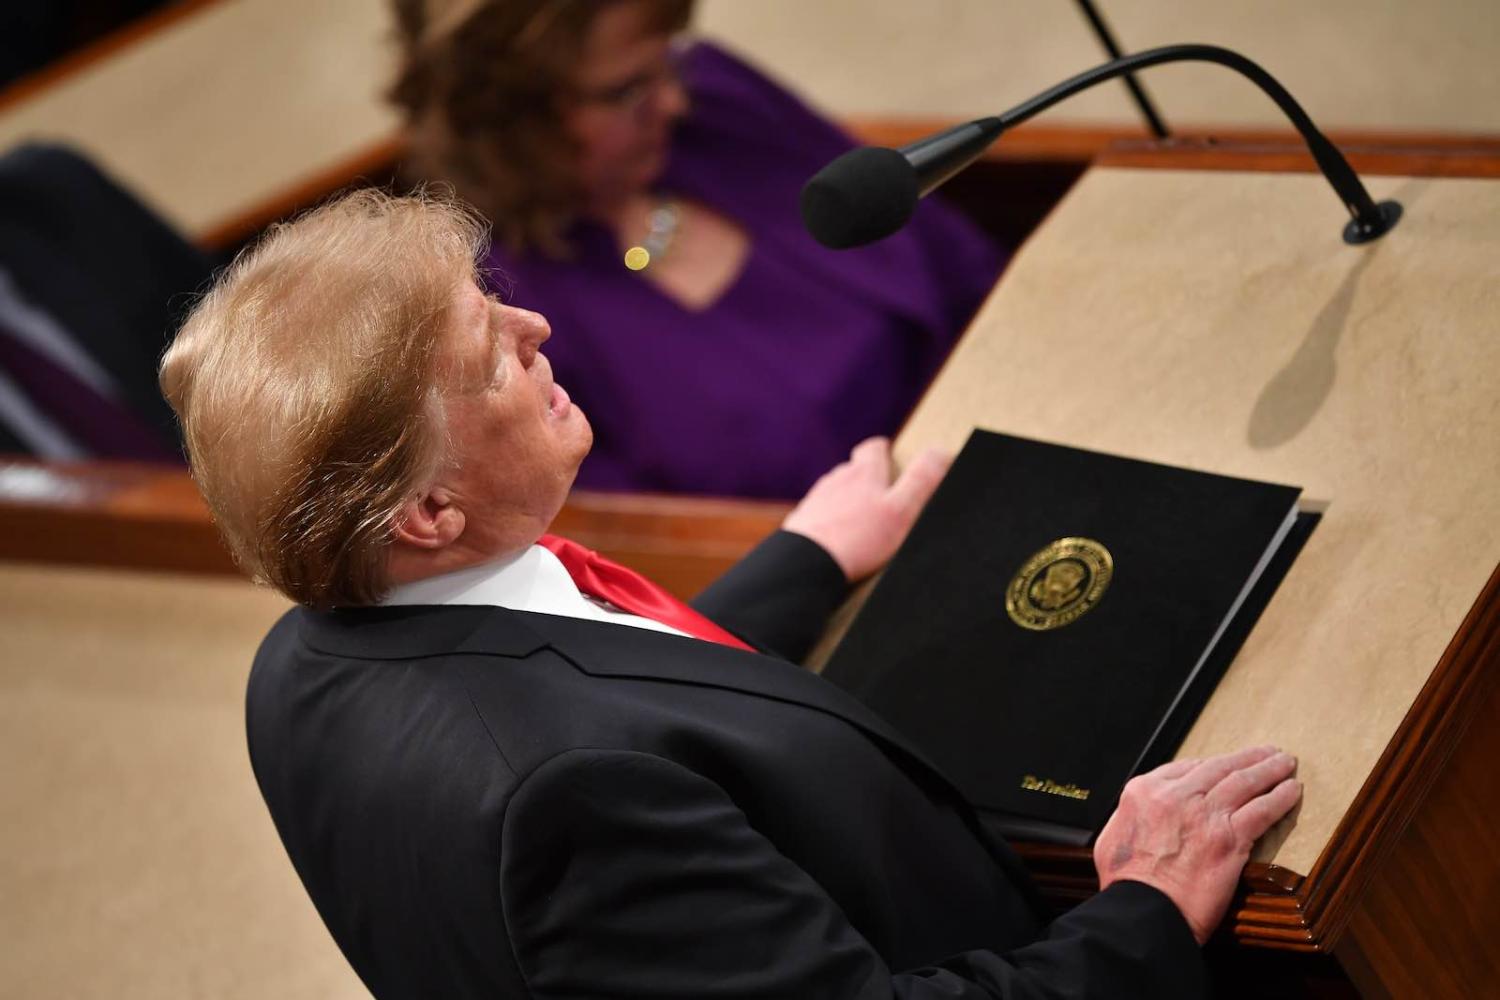 US President Donald Trump delivers the State of the Union address at the US Capitol in Washington DC (Photo by Mandel Ngan/AFP/Getty Images)